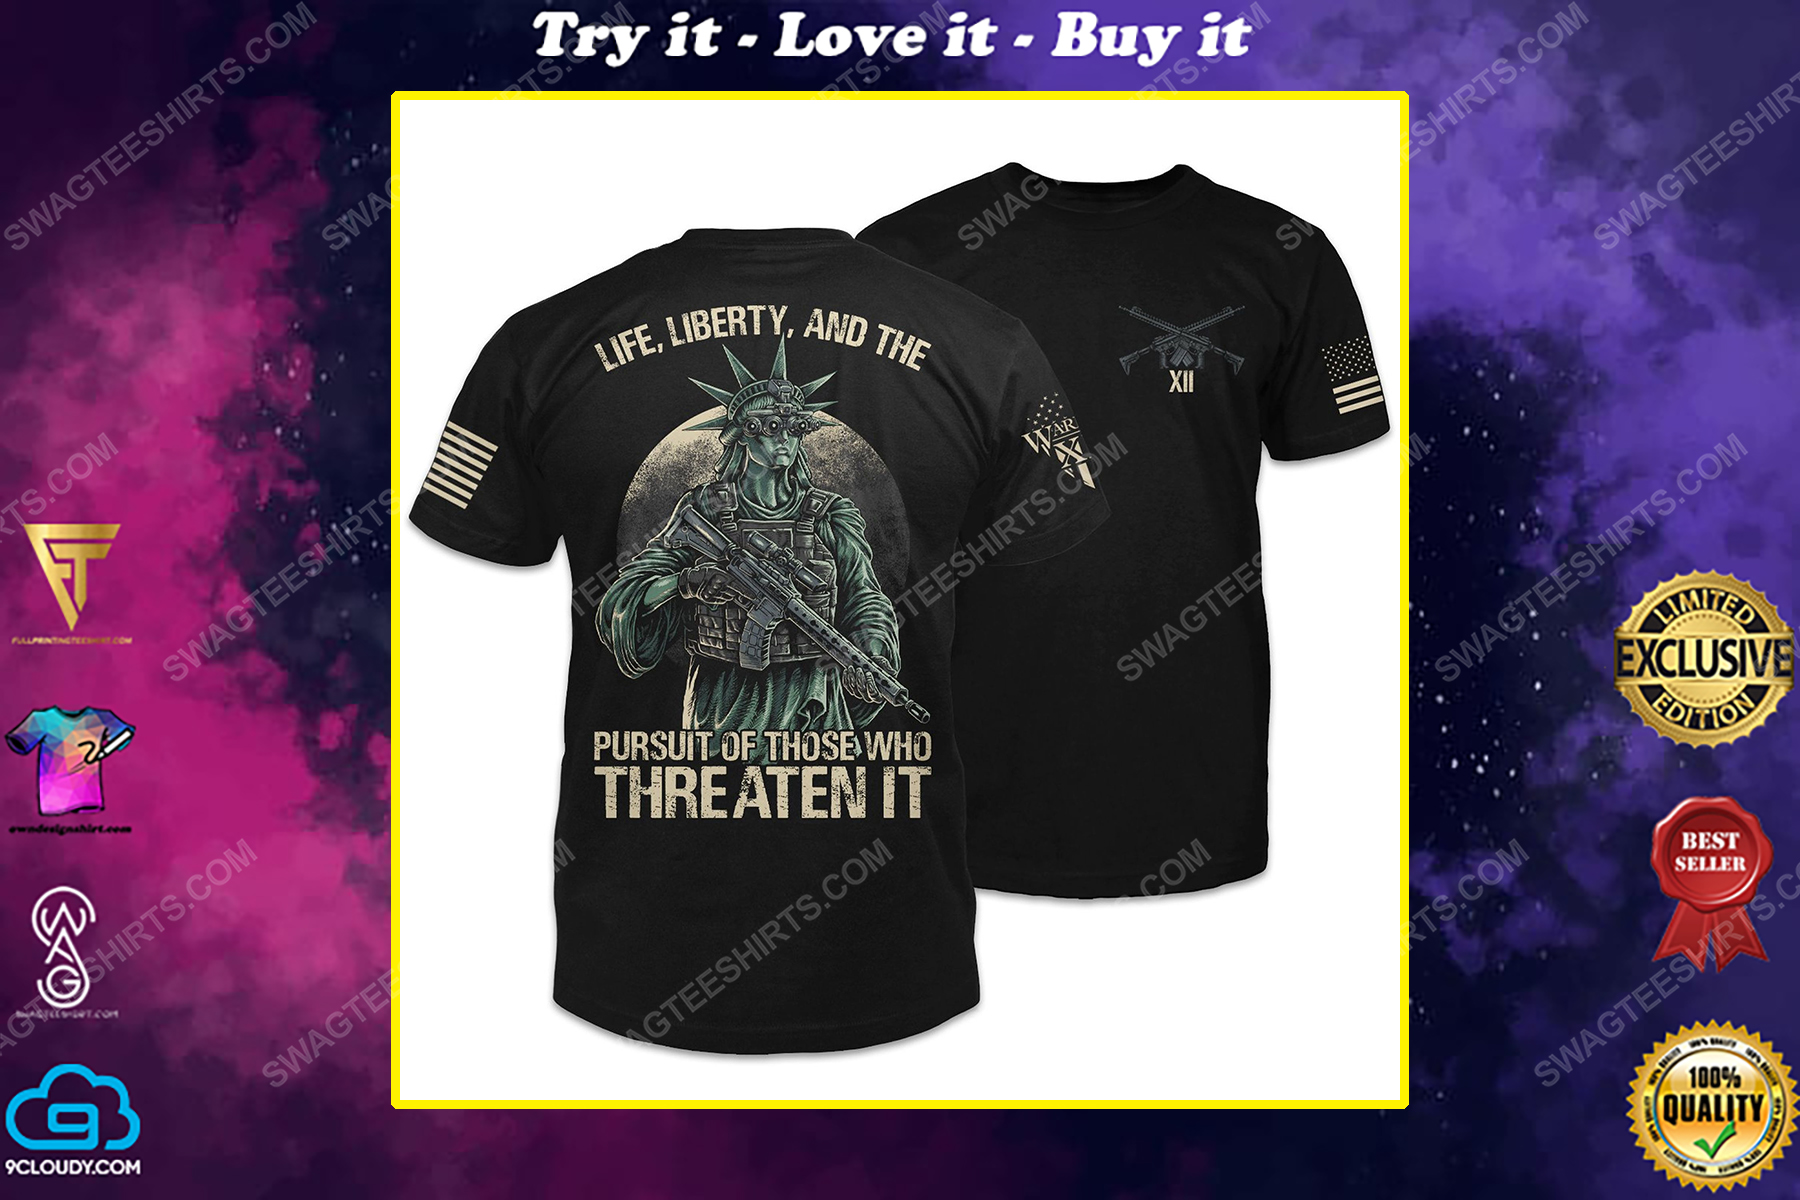 Life liberty and the pursuit of those who threaten it shirt